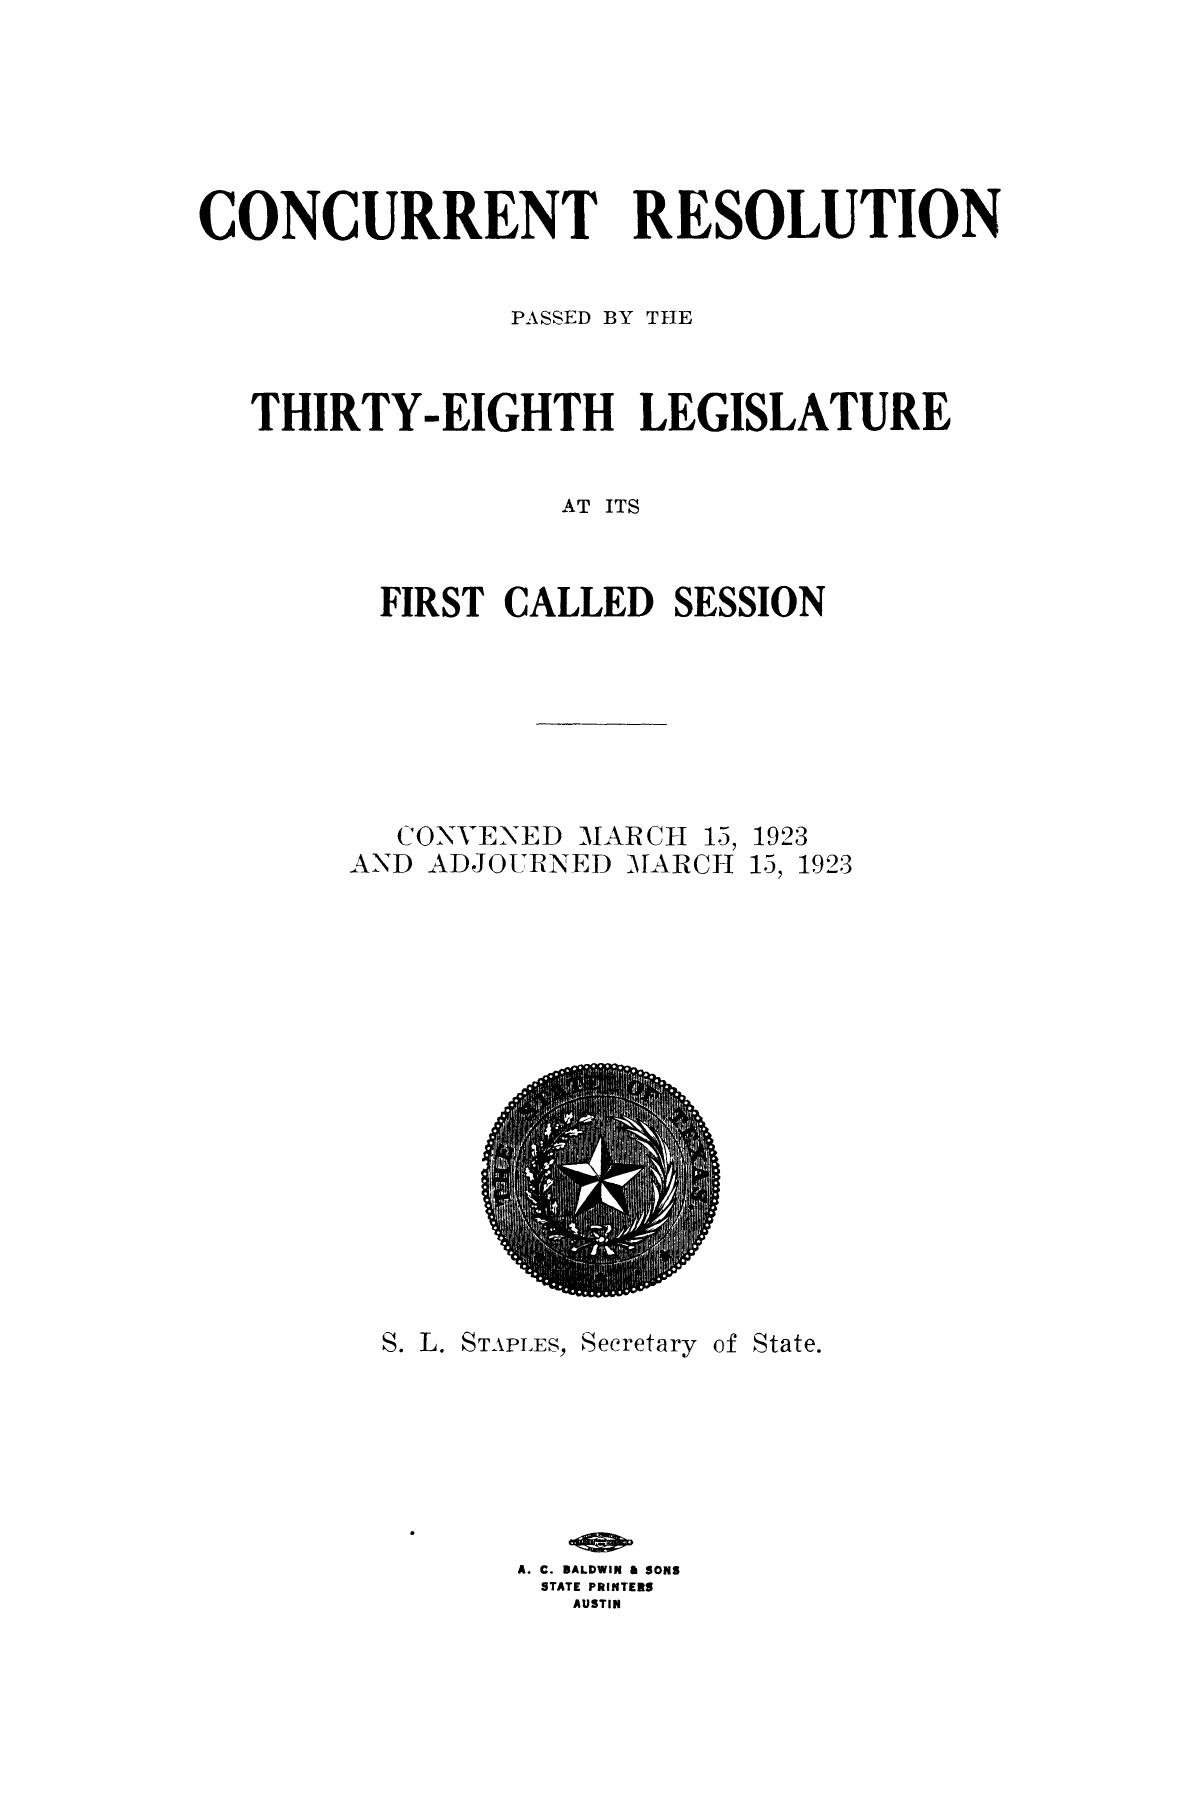 The Laws of Texas, 1923-1925 [Volume 22]
                                                
                                                    [Sequence #]: 391 of 1648
                                                